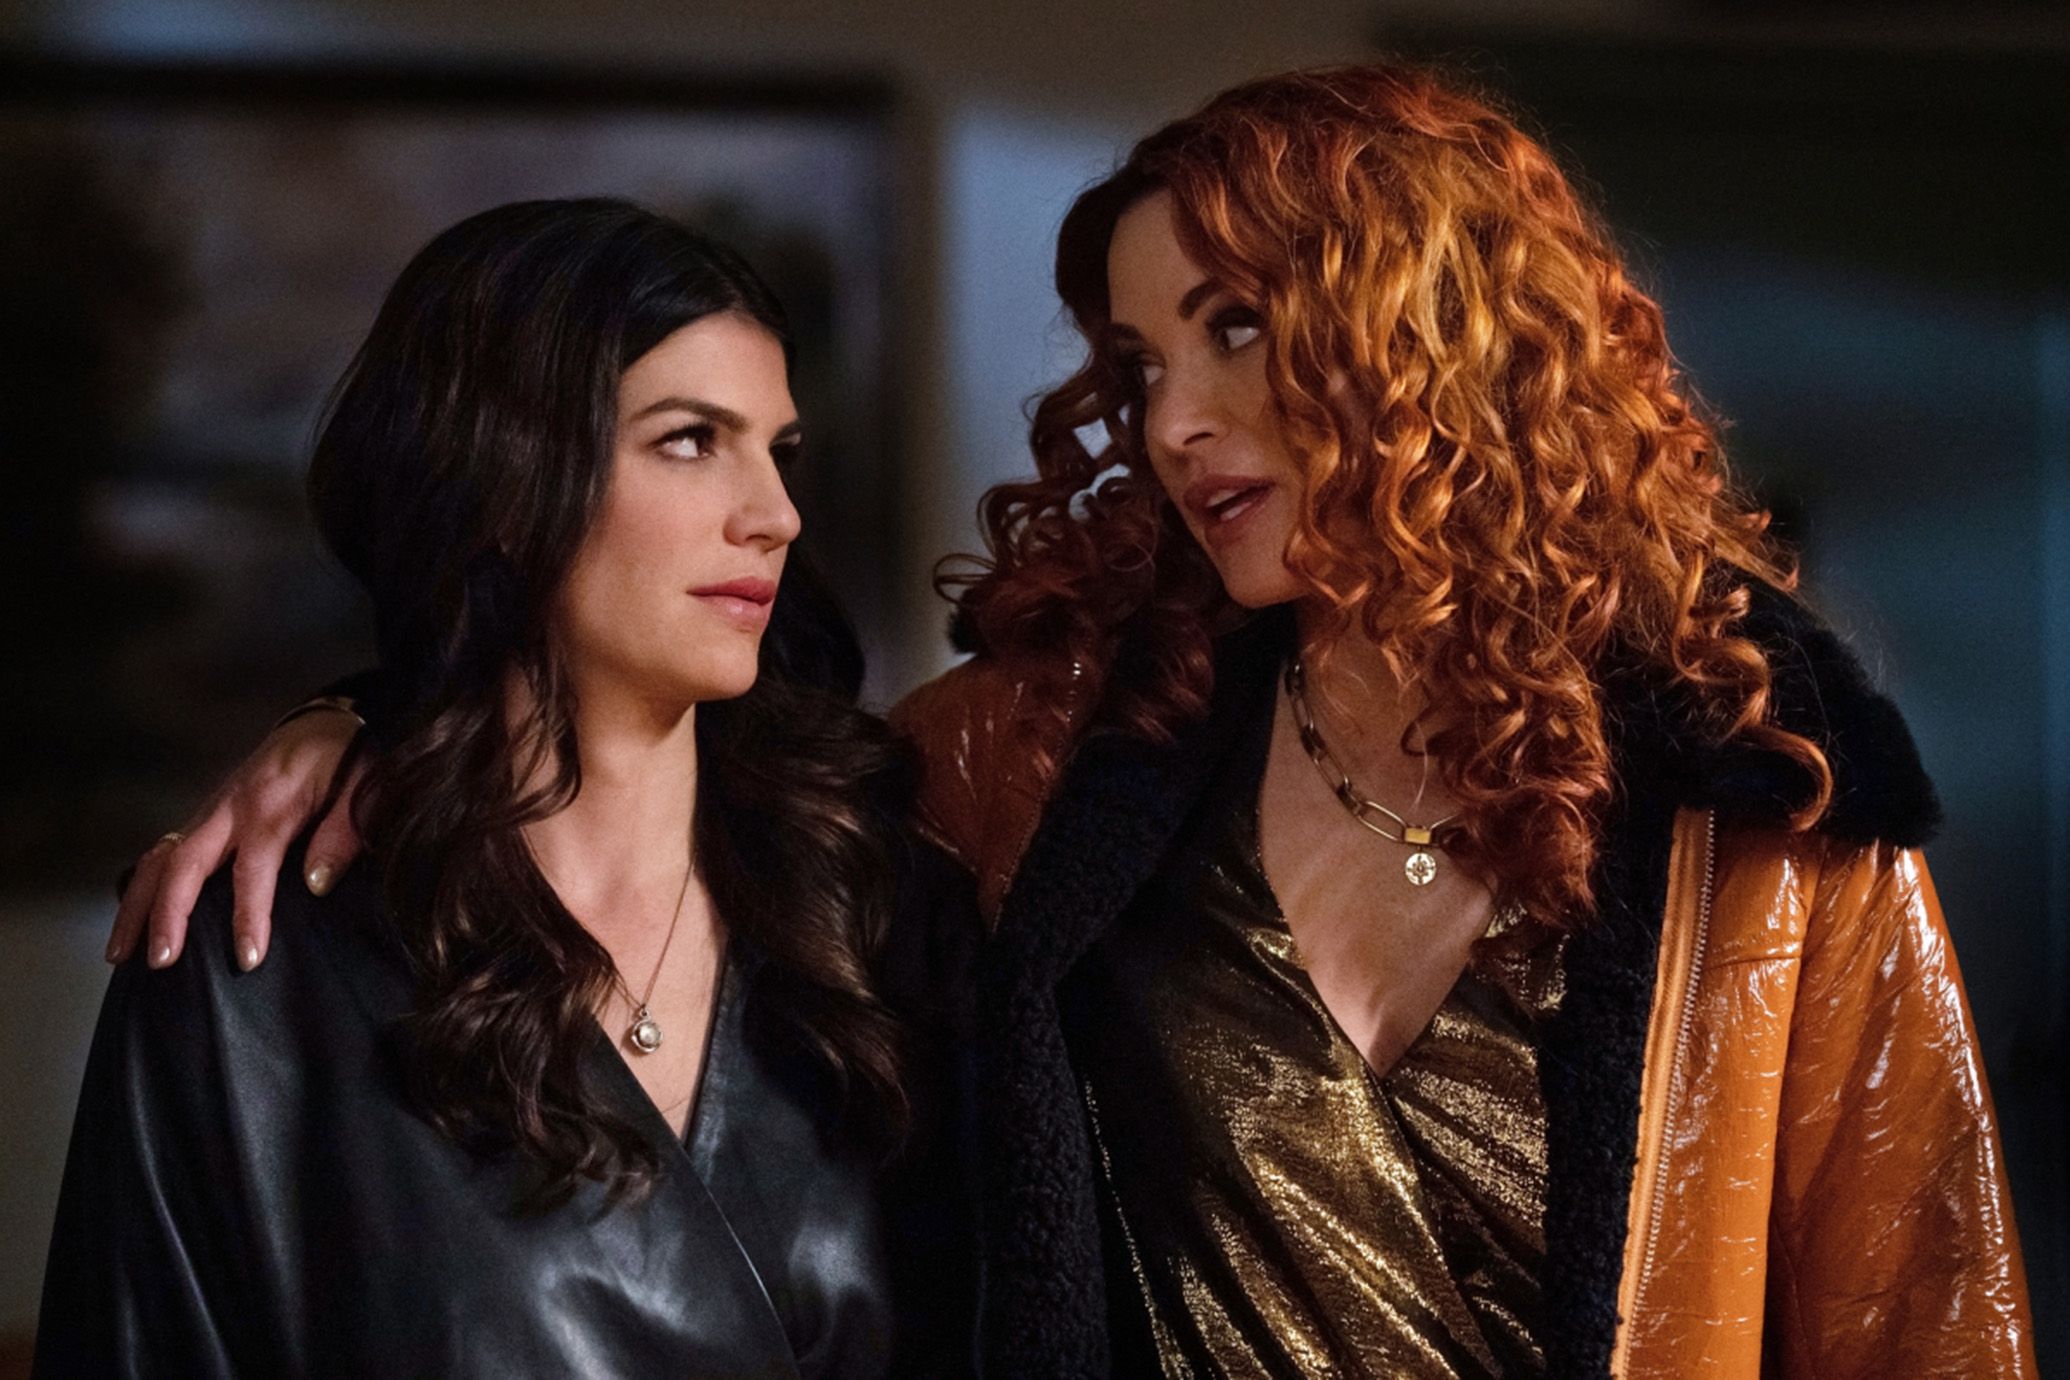 Danneel Ackles and Genevieve Padalecki Finally Come Face to Face in New Supernatural Photo